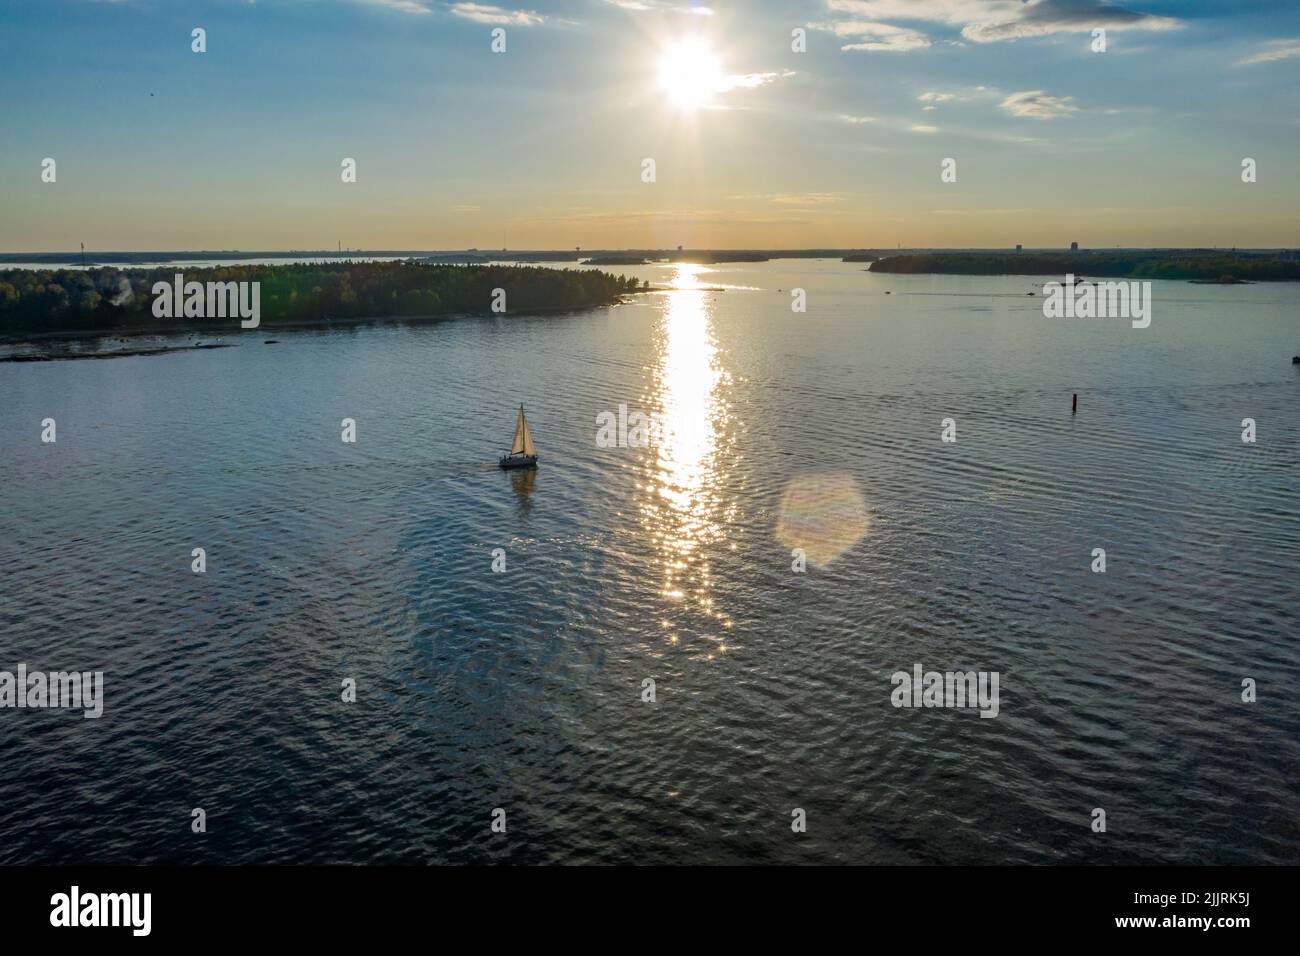 Aerial view of a sailboat in the Helsinki archipelago, summer evening in Finland Stock Photo